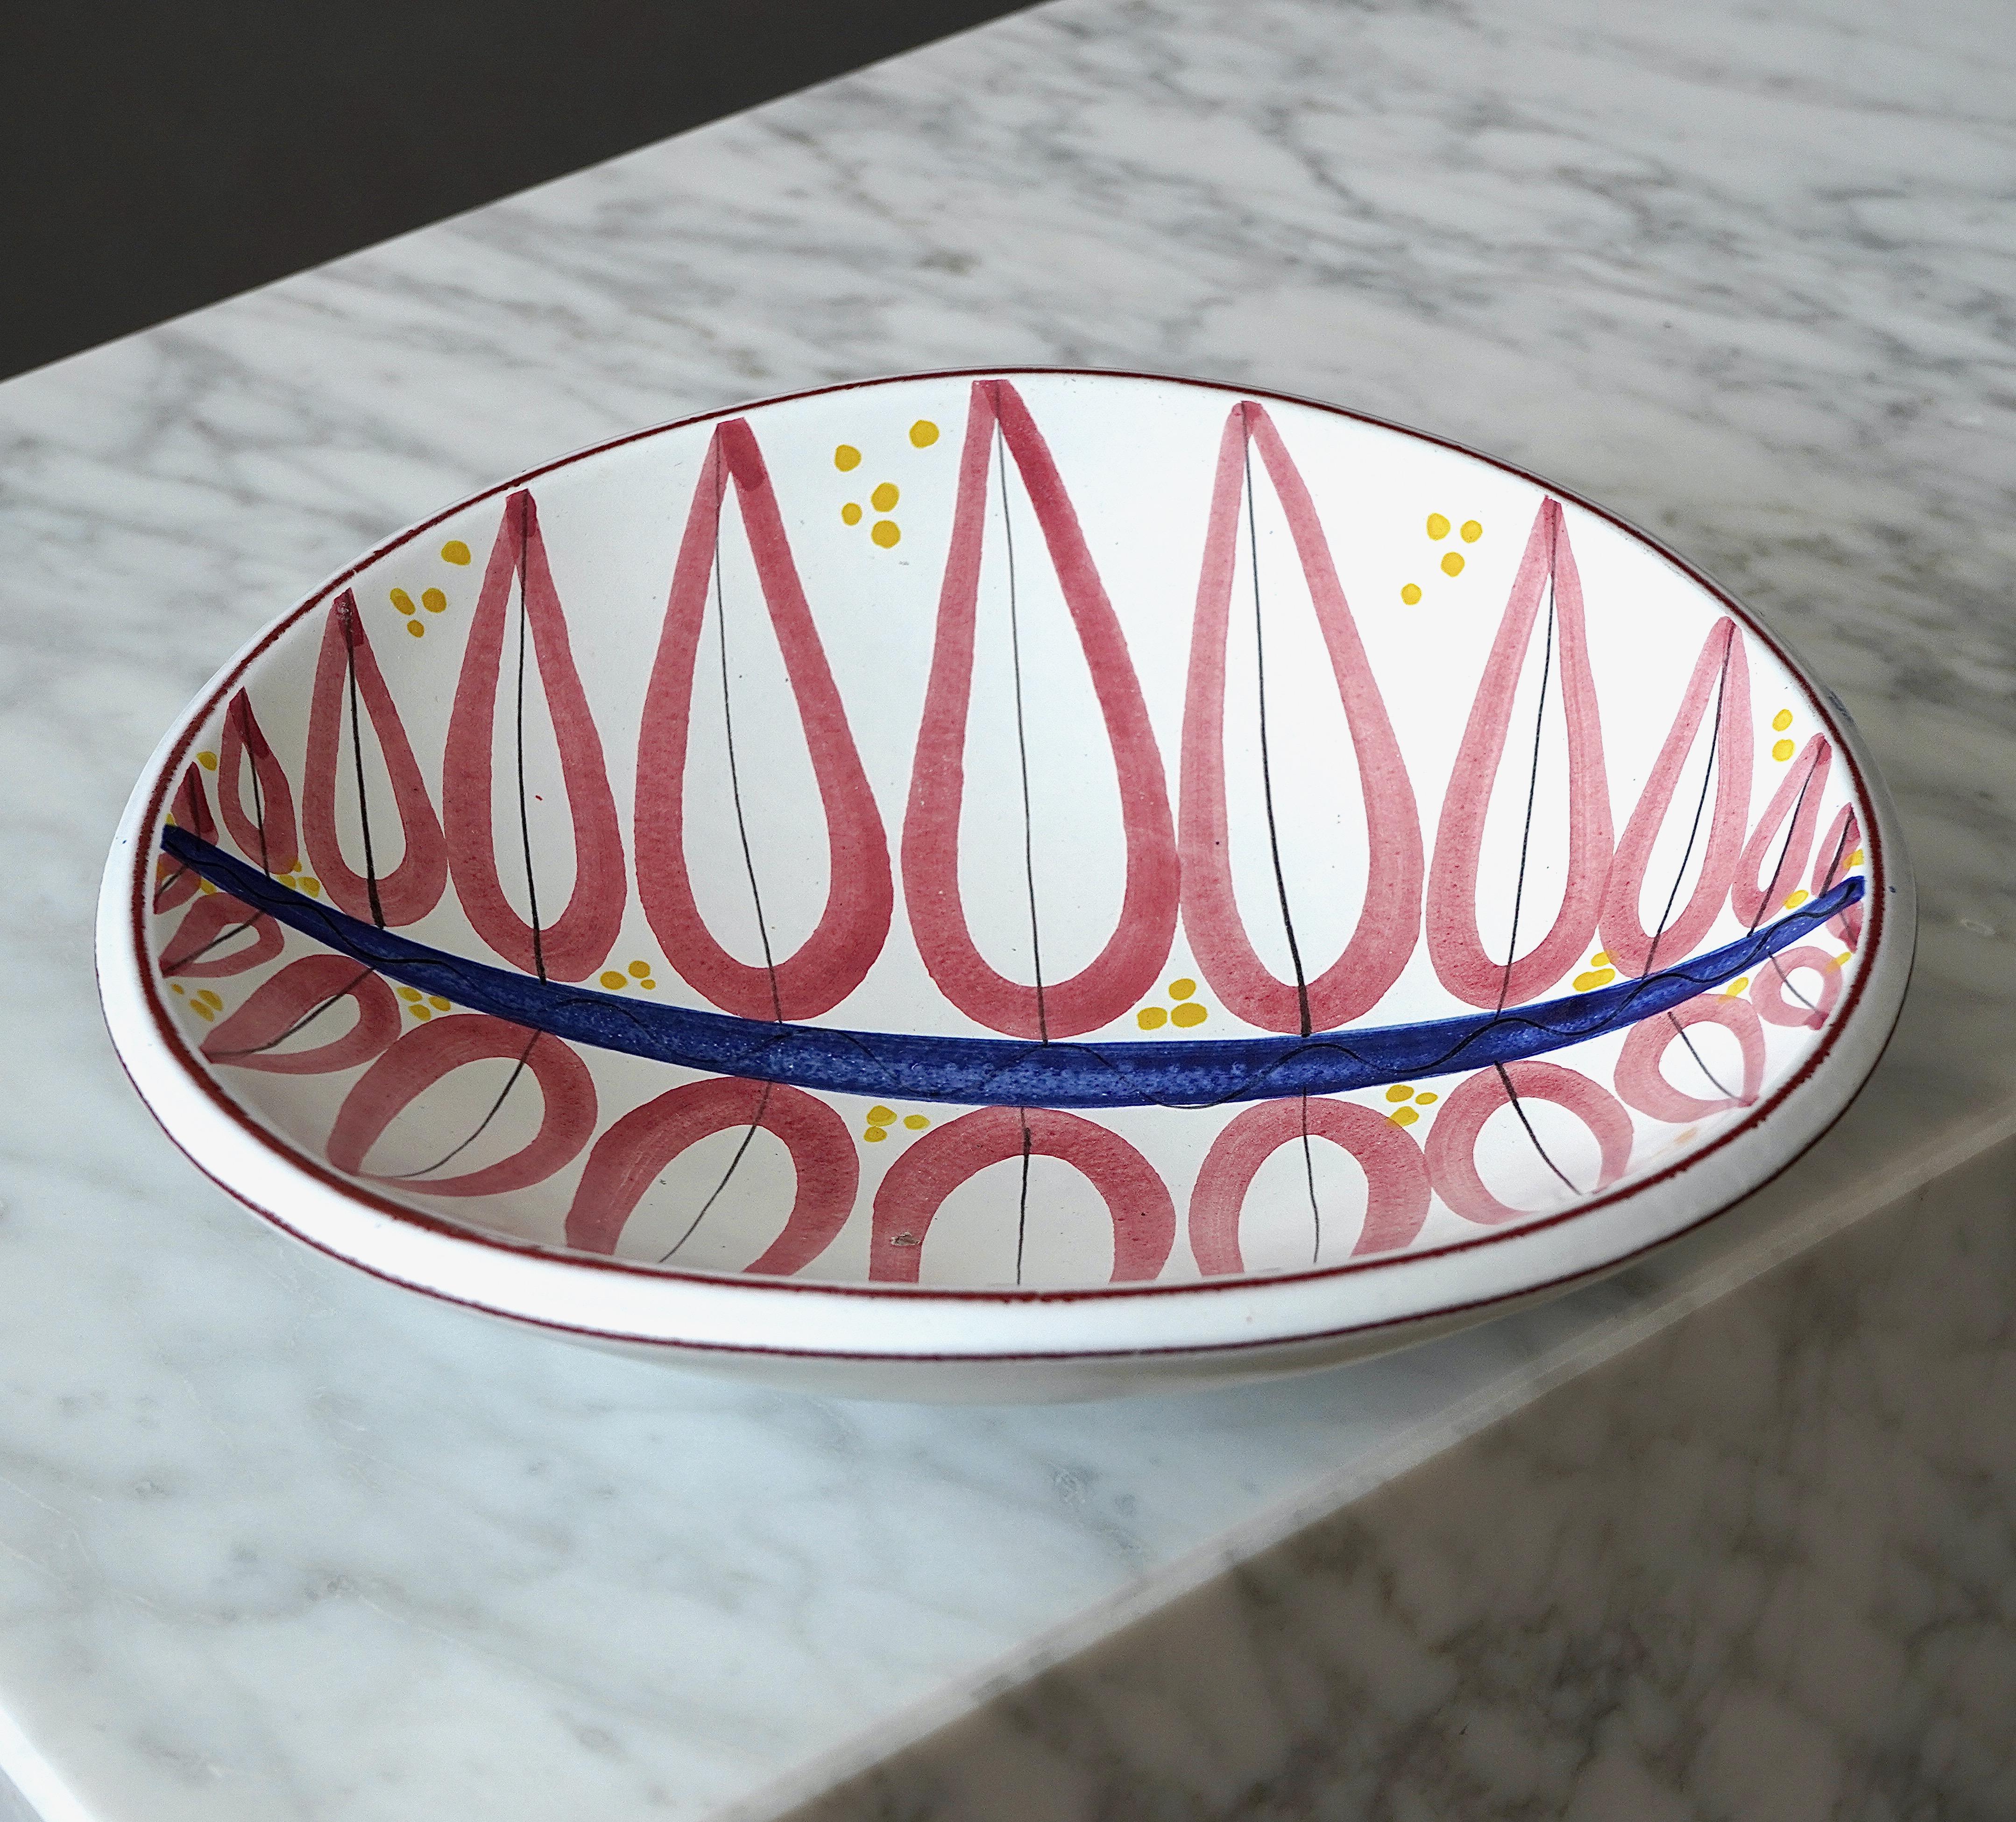 A beautiful faience bowl with amazing geometric pattern.
Designed by Stig Lindberg in Gustavsberg Studio, Sweden, 1950s.

Good condition (there is a small mark in the glaze shown in detail picture).
Signed with the Gustavsberg studio hand.

Stig